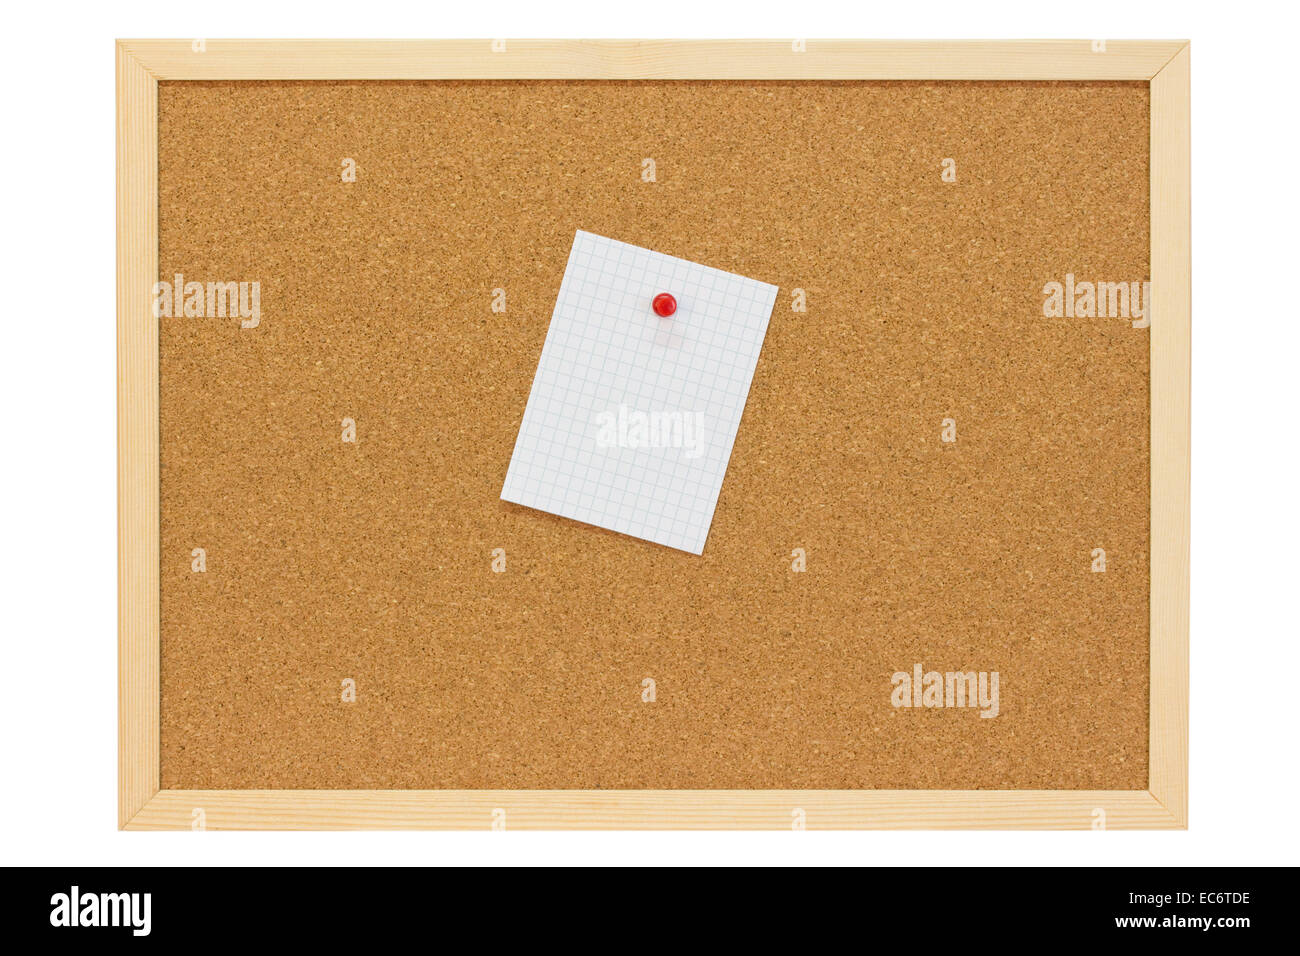 White note with red pushpin on a pin board Stock Photo